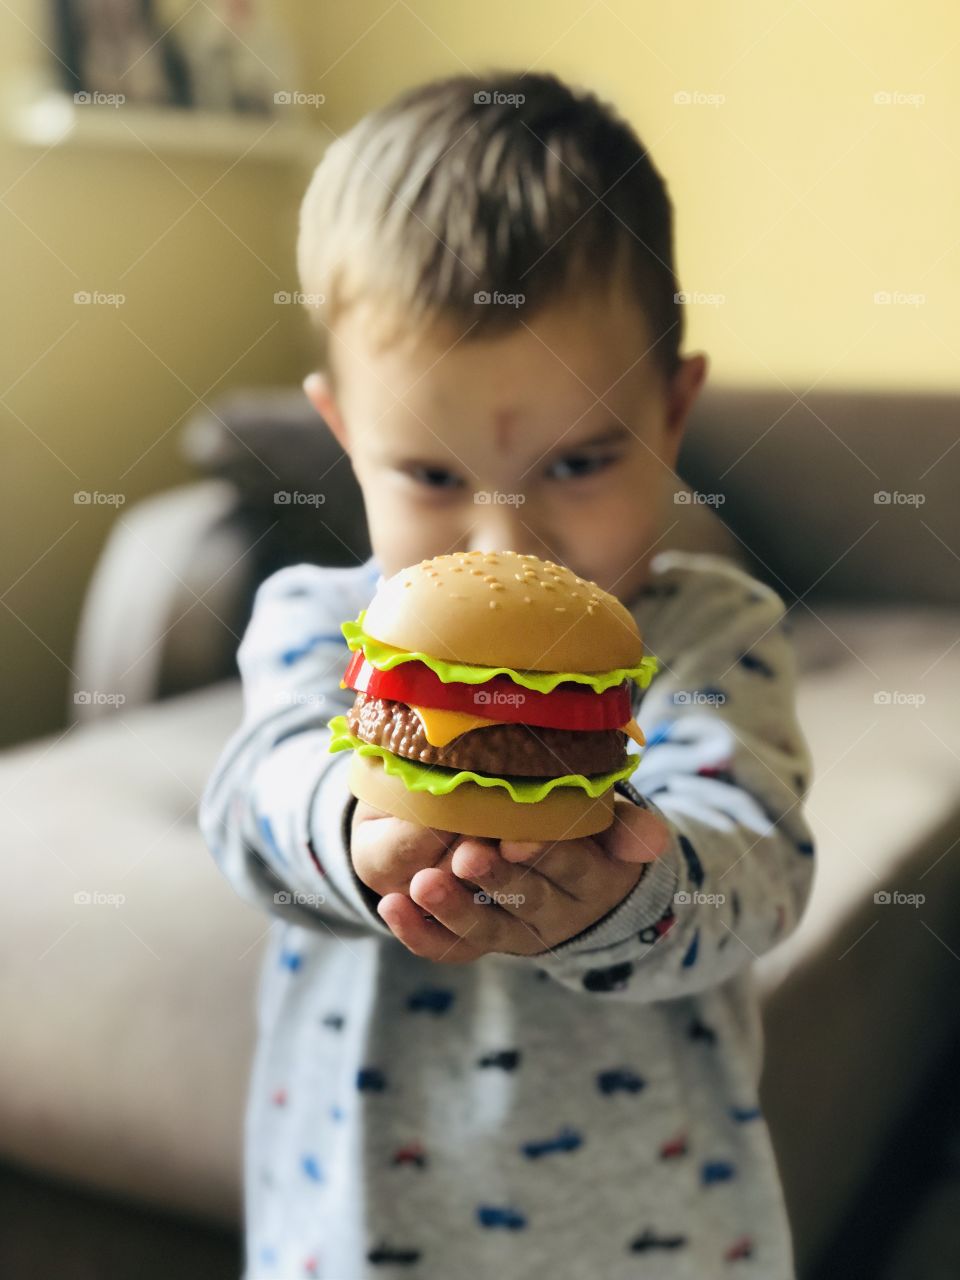 Burger Want some